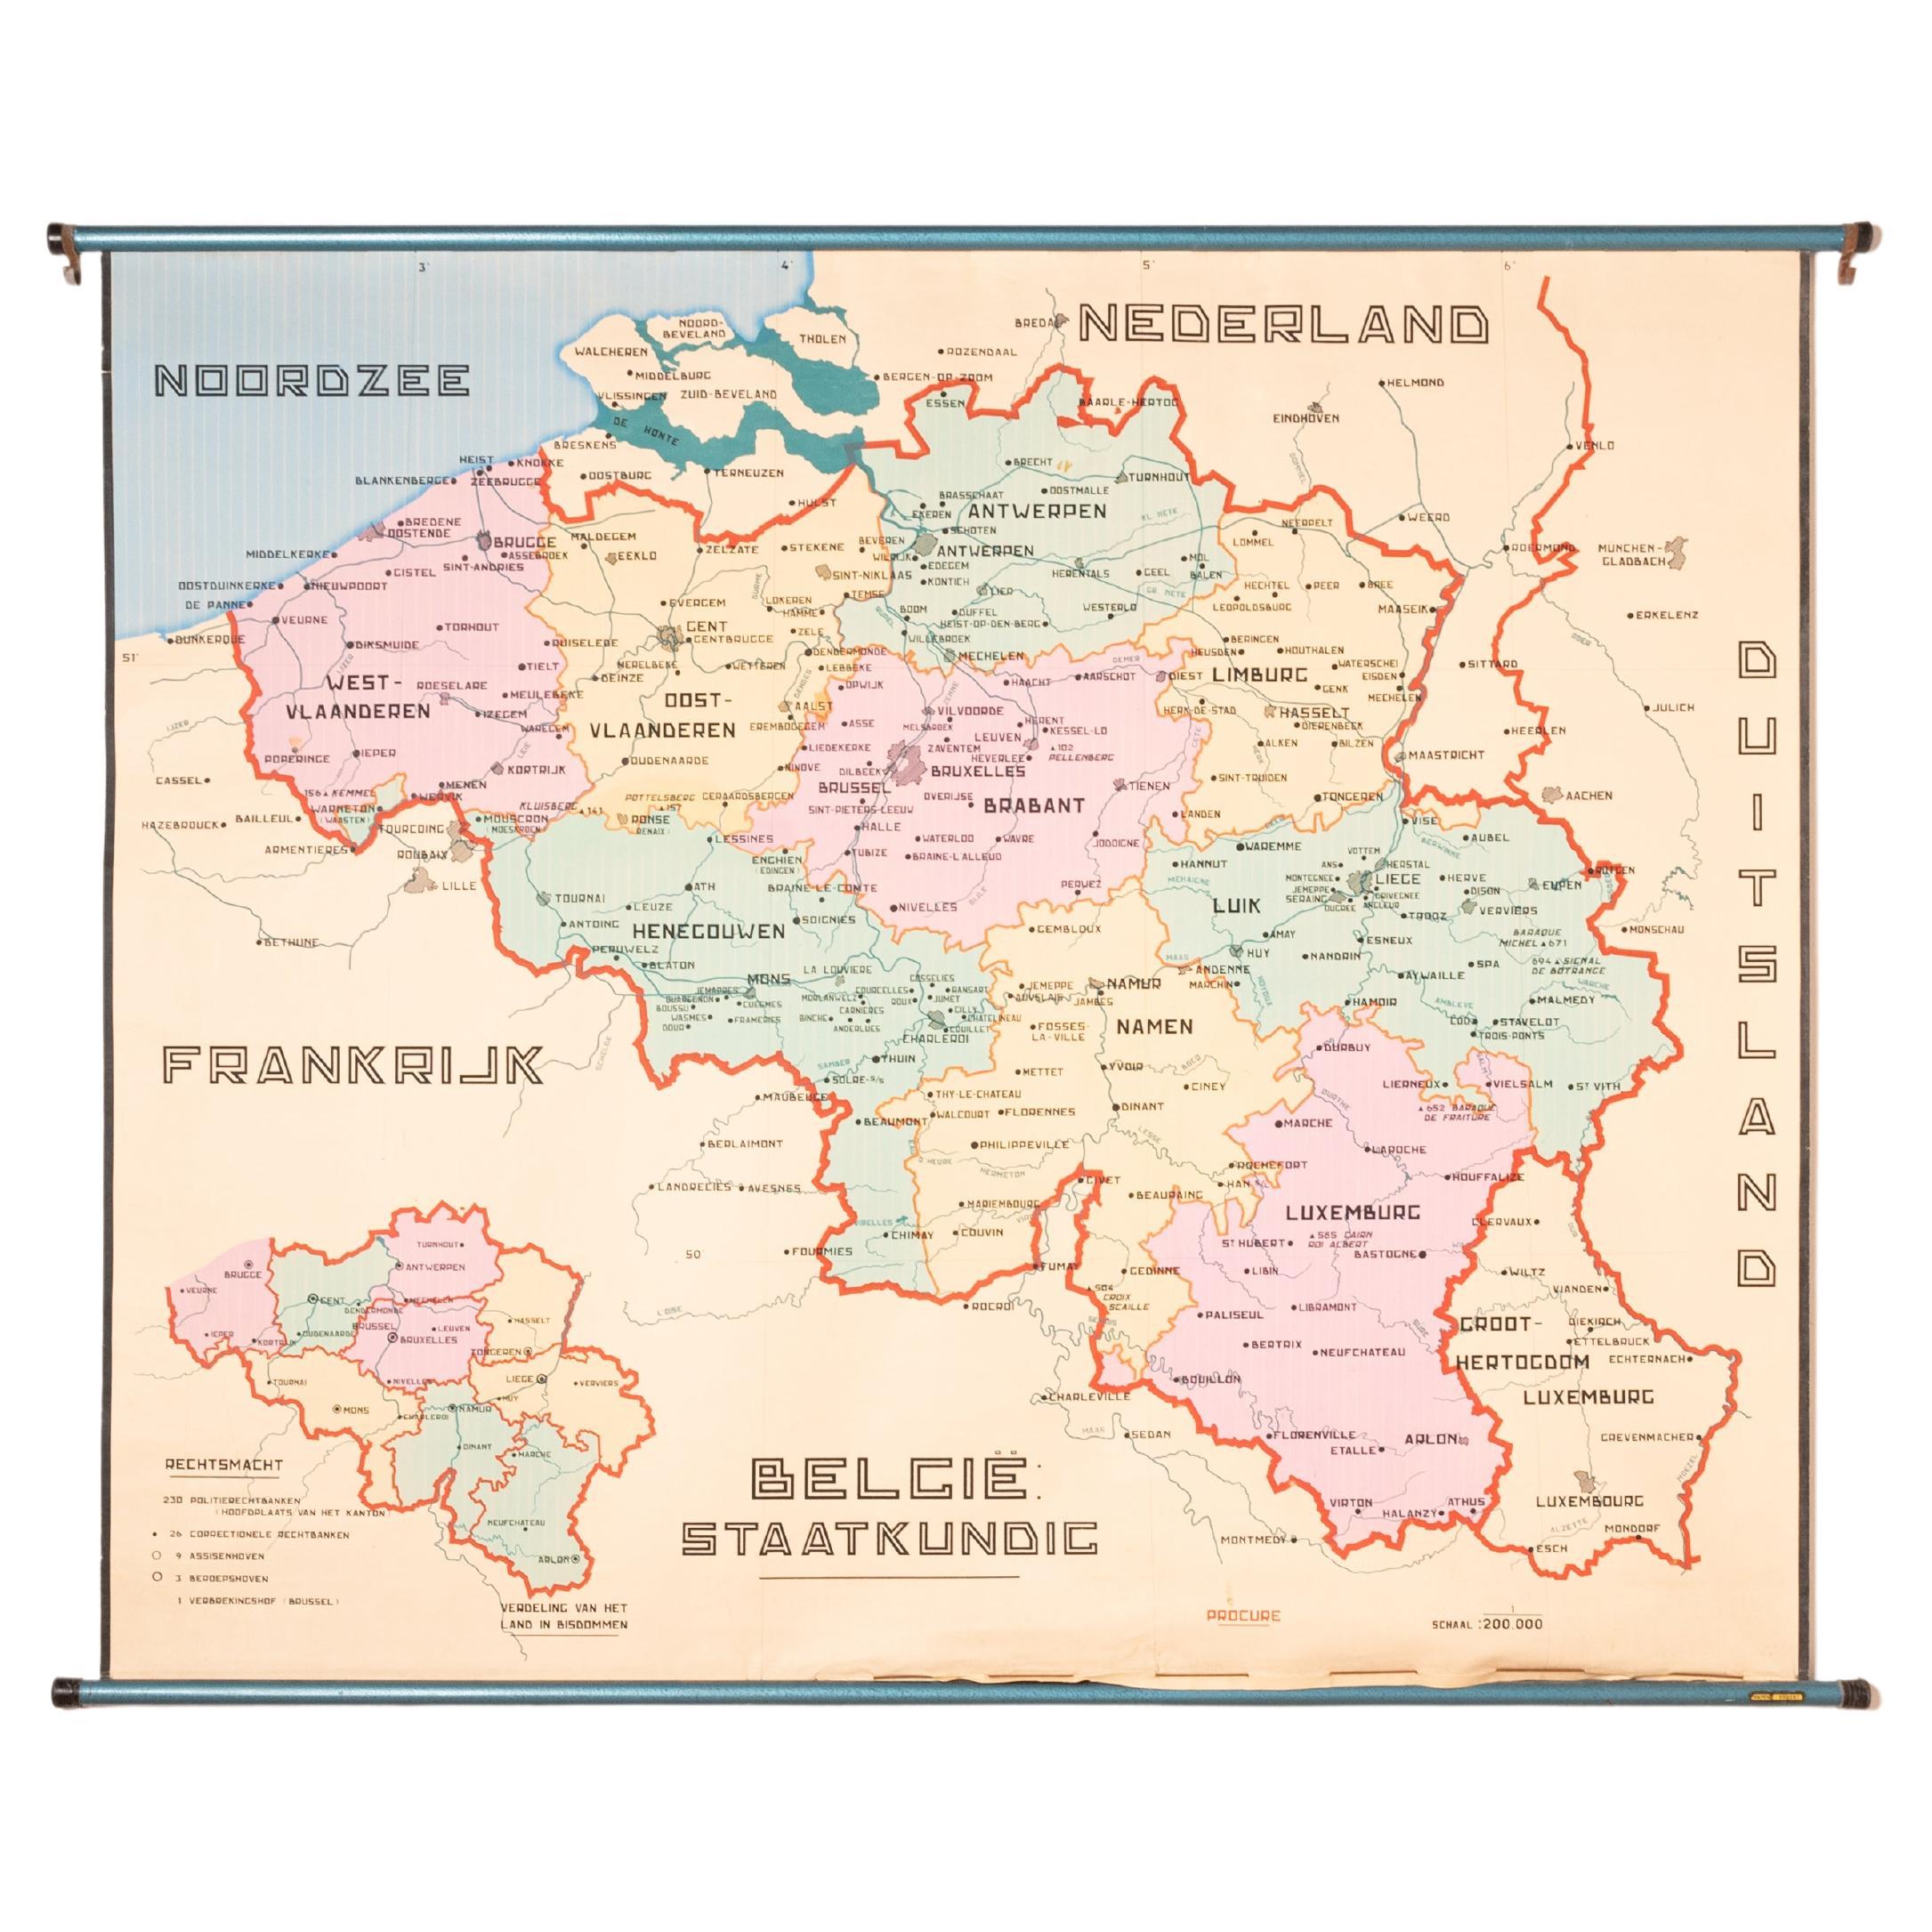 XL Old School Map of Belgium 'Printed by Procure', 1950s